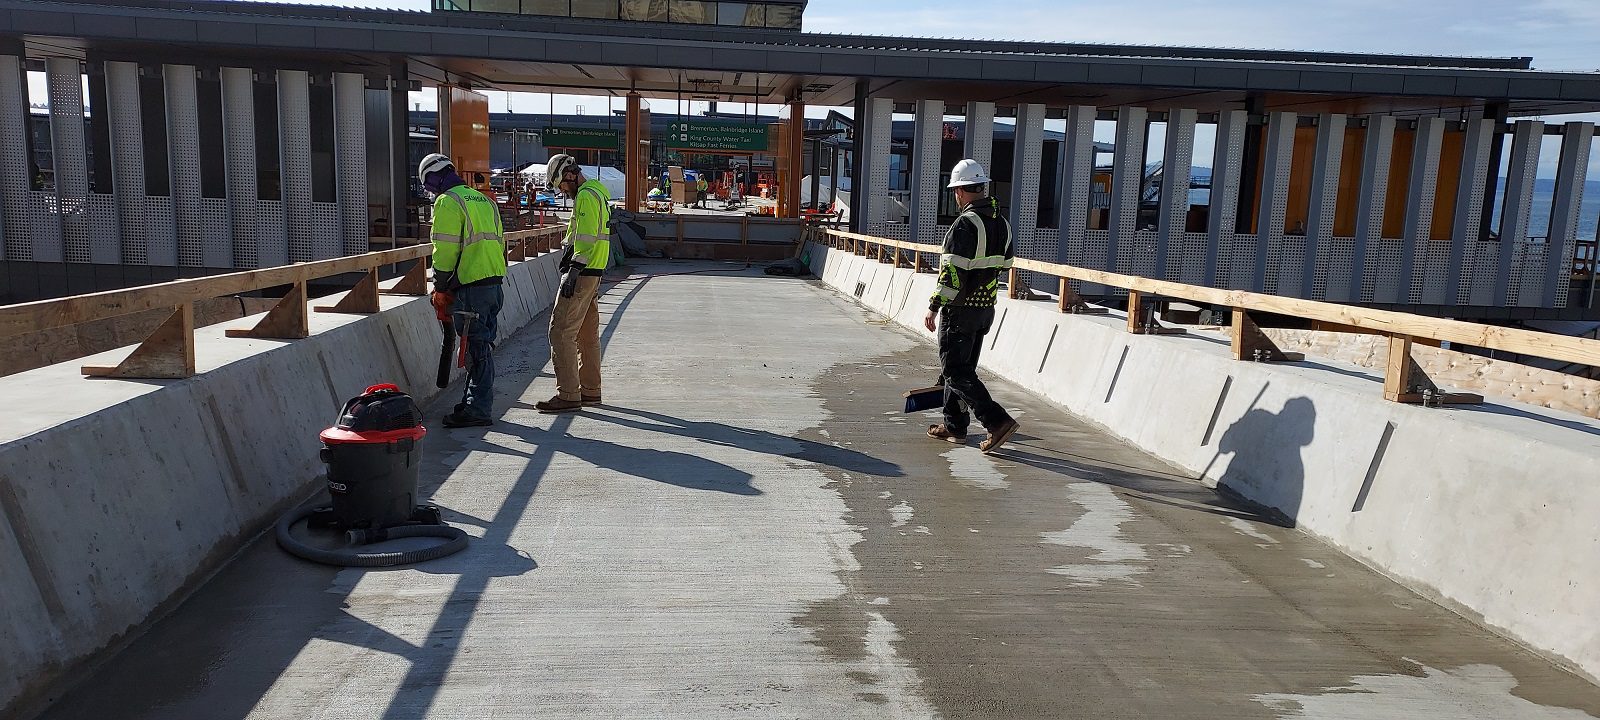 Three construction workers wearing safety vests and hardhats stand atop a concrete bridge next to a large entry building, on a sunny day.